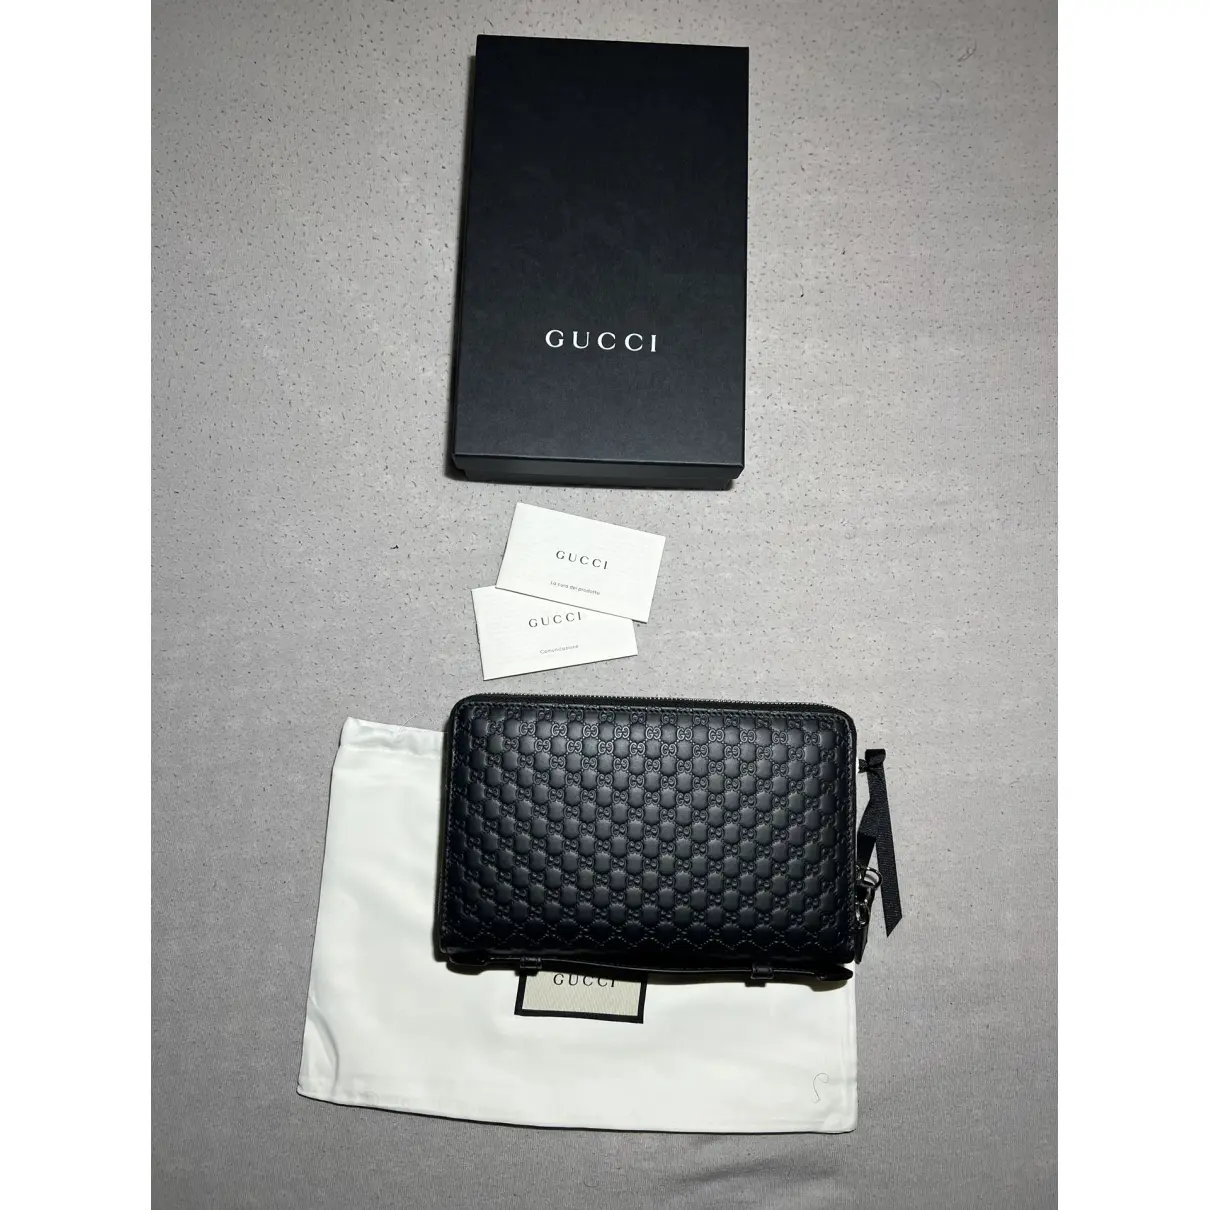 Buy Gucci Leather bag online